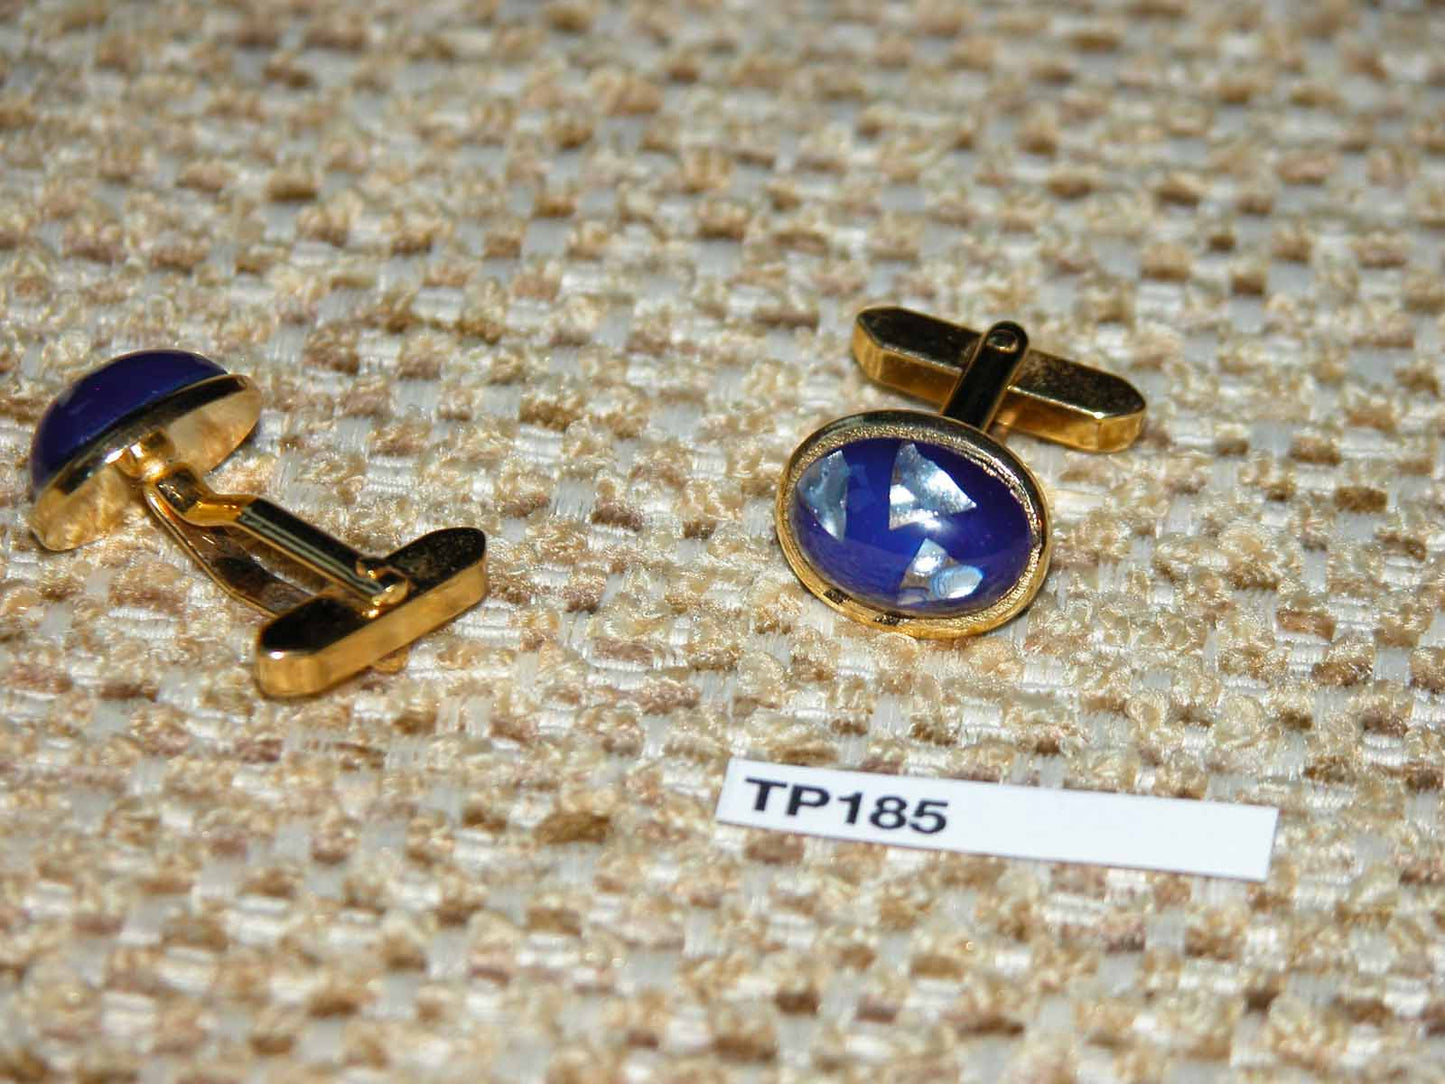 Vintage gold metal blue and pearl oval art glass stones cuff links